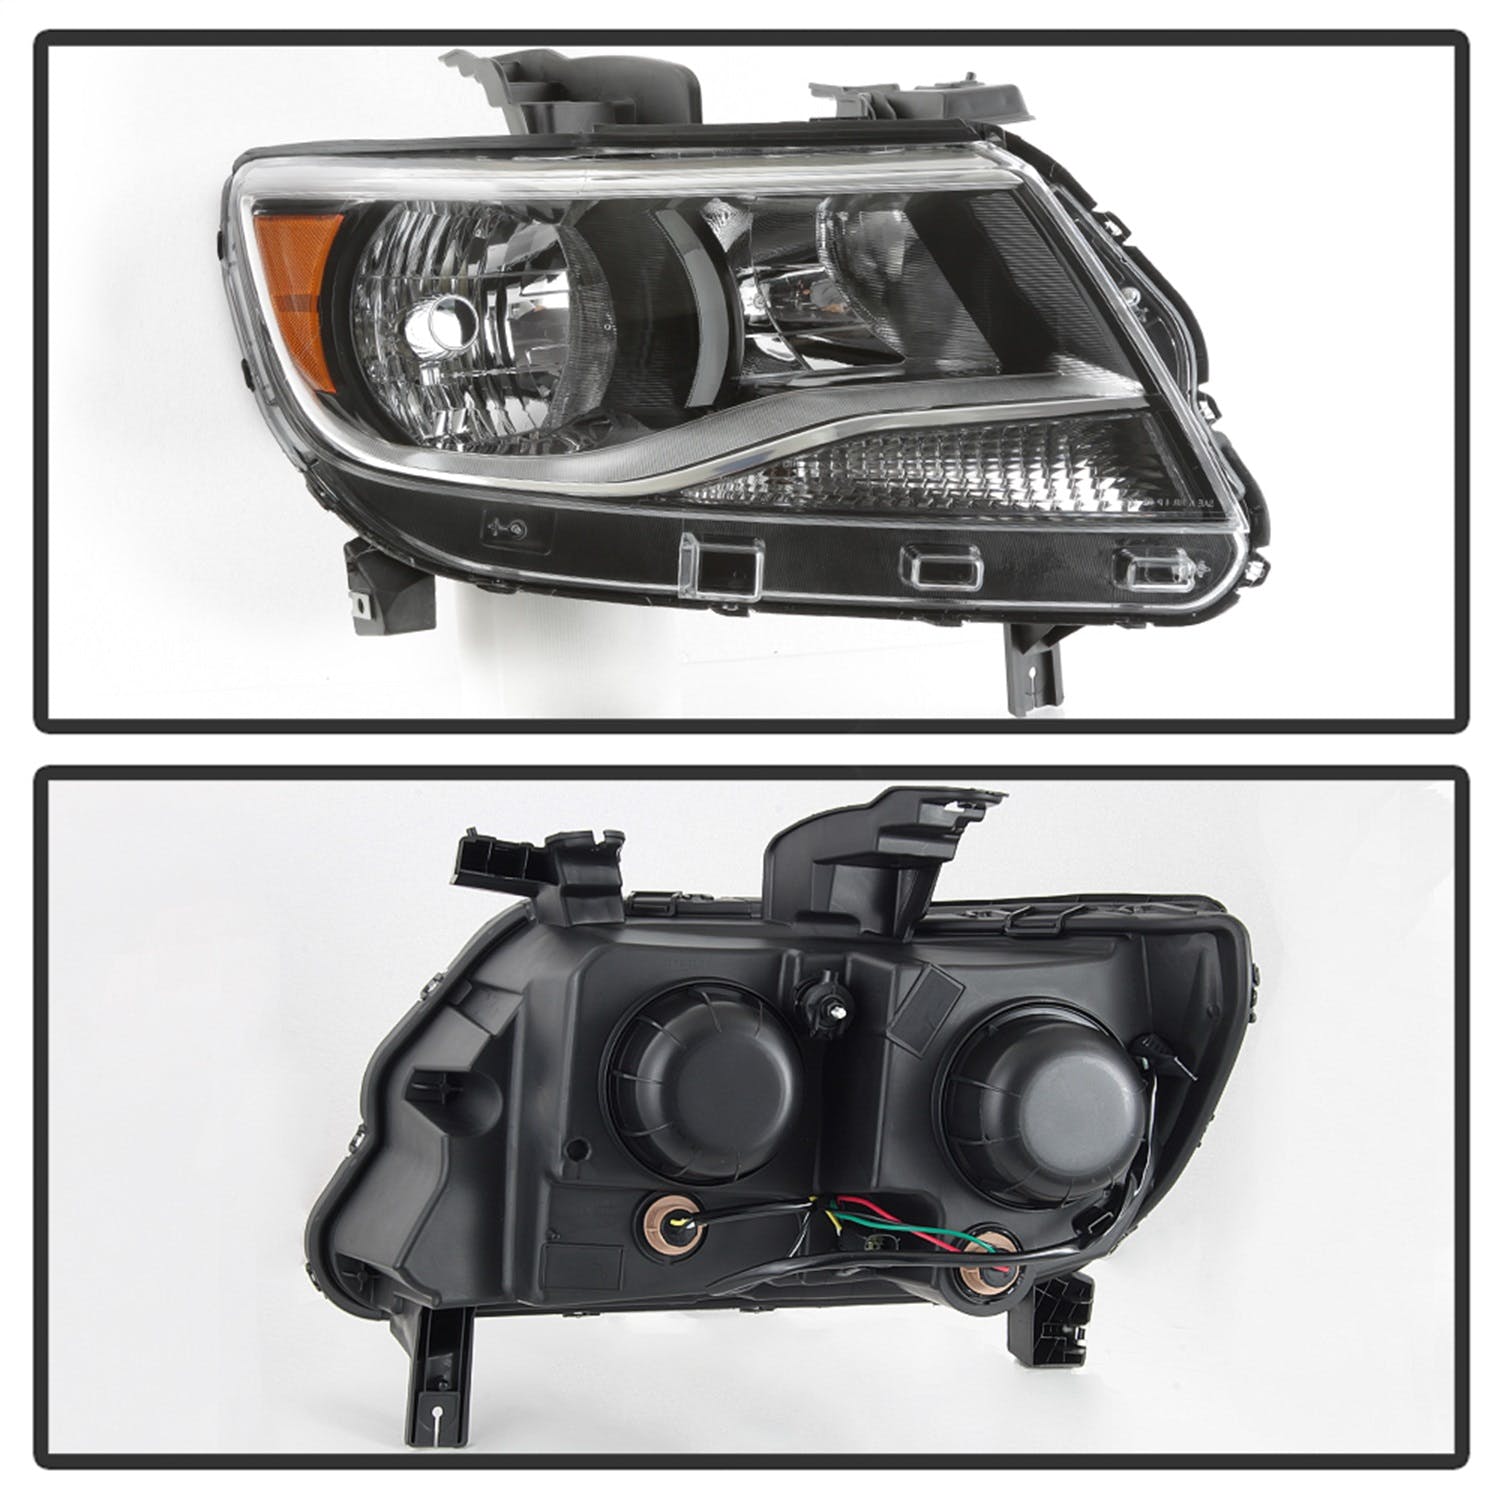 XTUNE POWER 9040542 Chevy Colorado 2015 2021 Halogen Models Only ( Does Not fit Xenon HID and Projector Models ) Passenger Side Headlight Low Beam H11(Included) ; High Beam 9005(Included) ; Signal 7444NA(Not Included) OEM Right